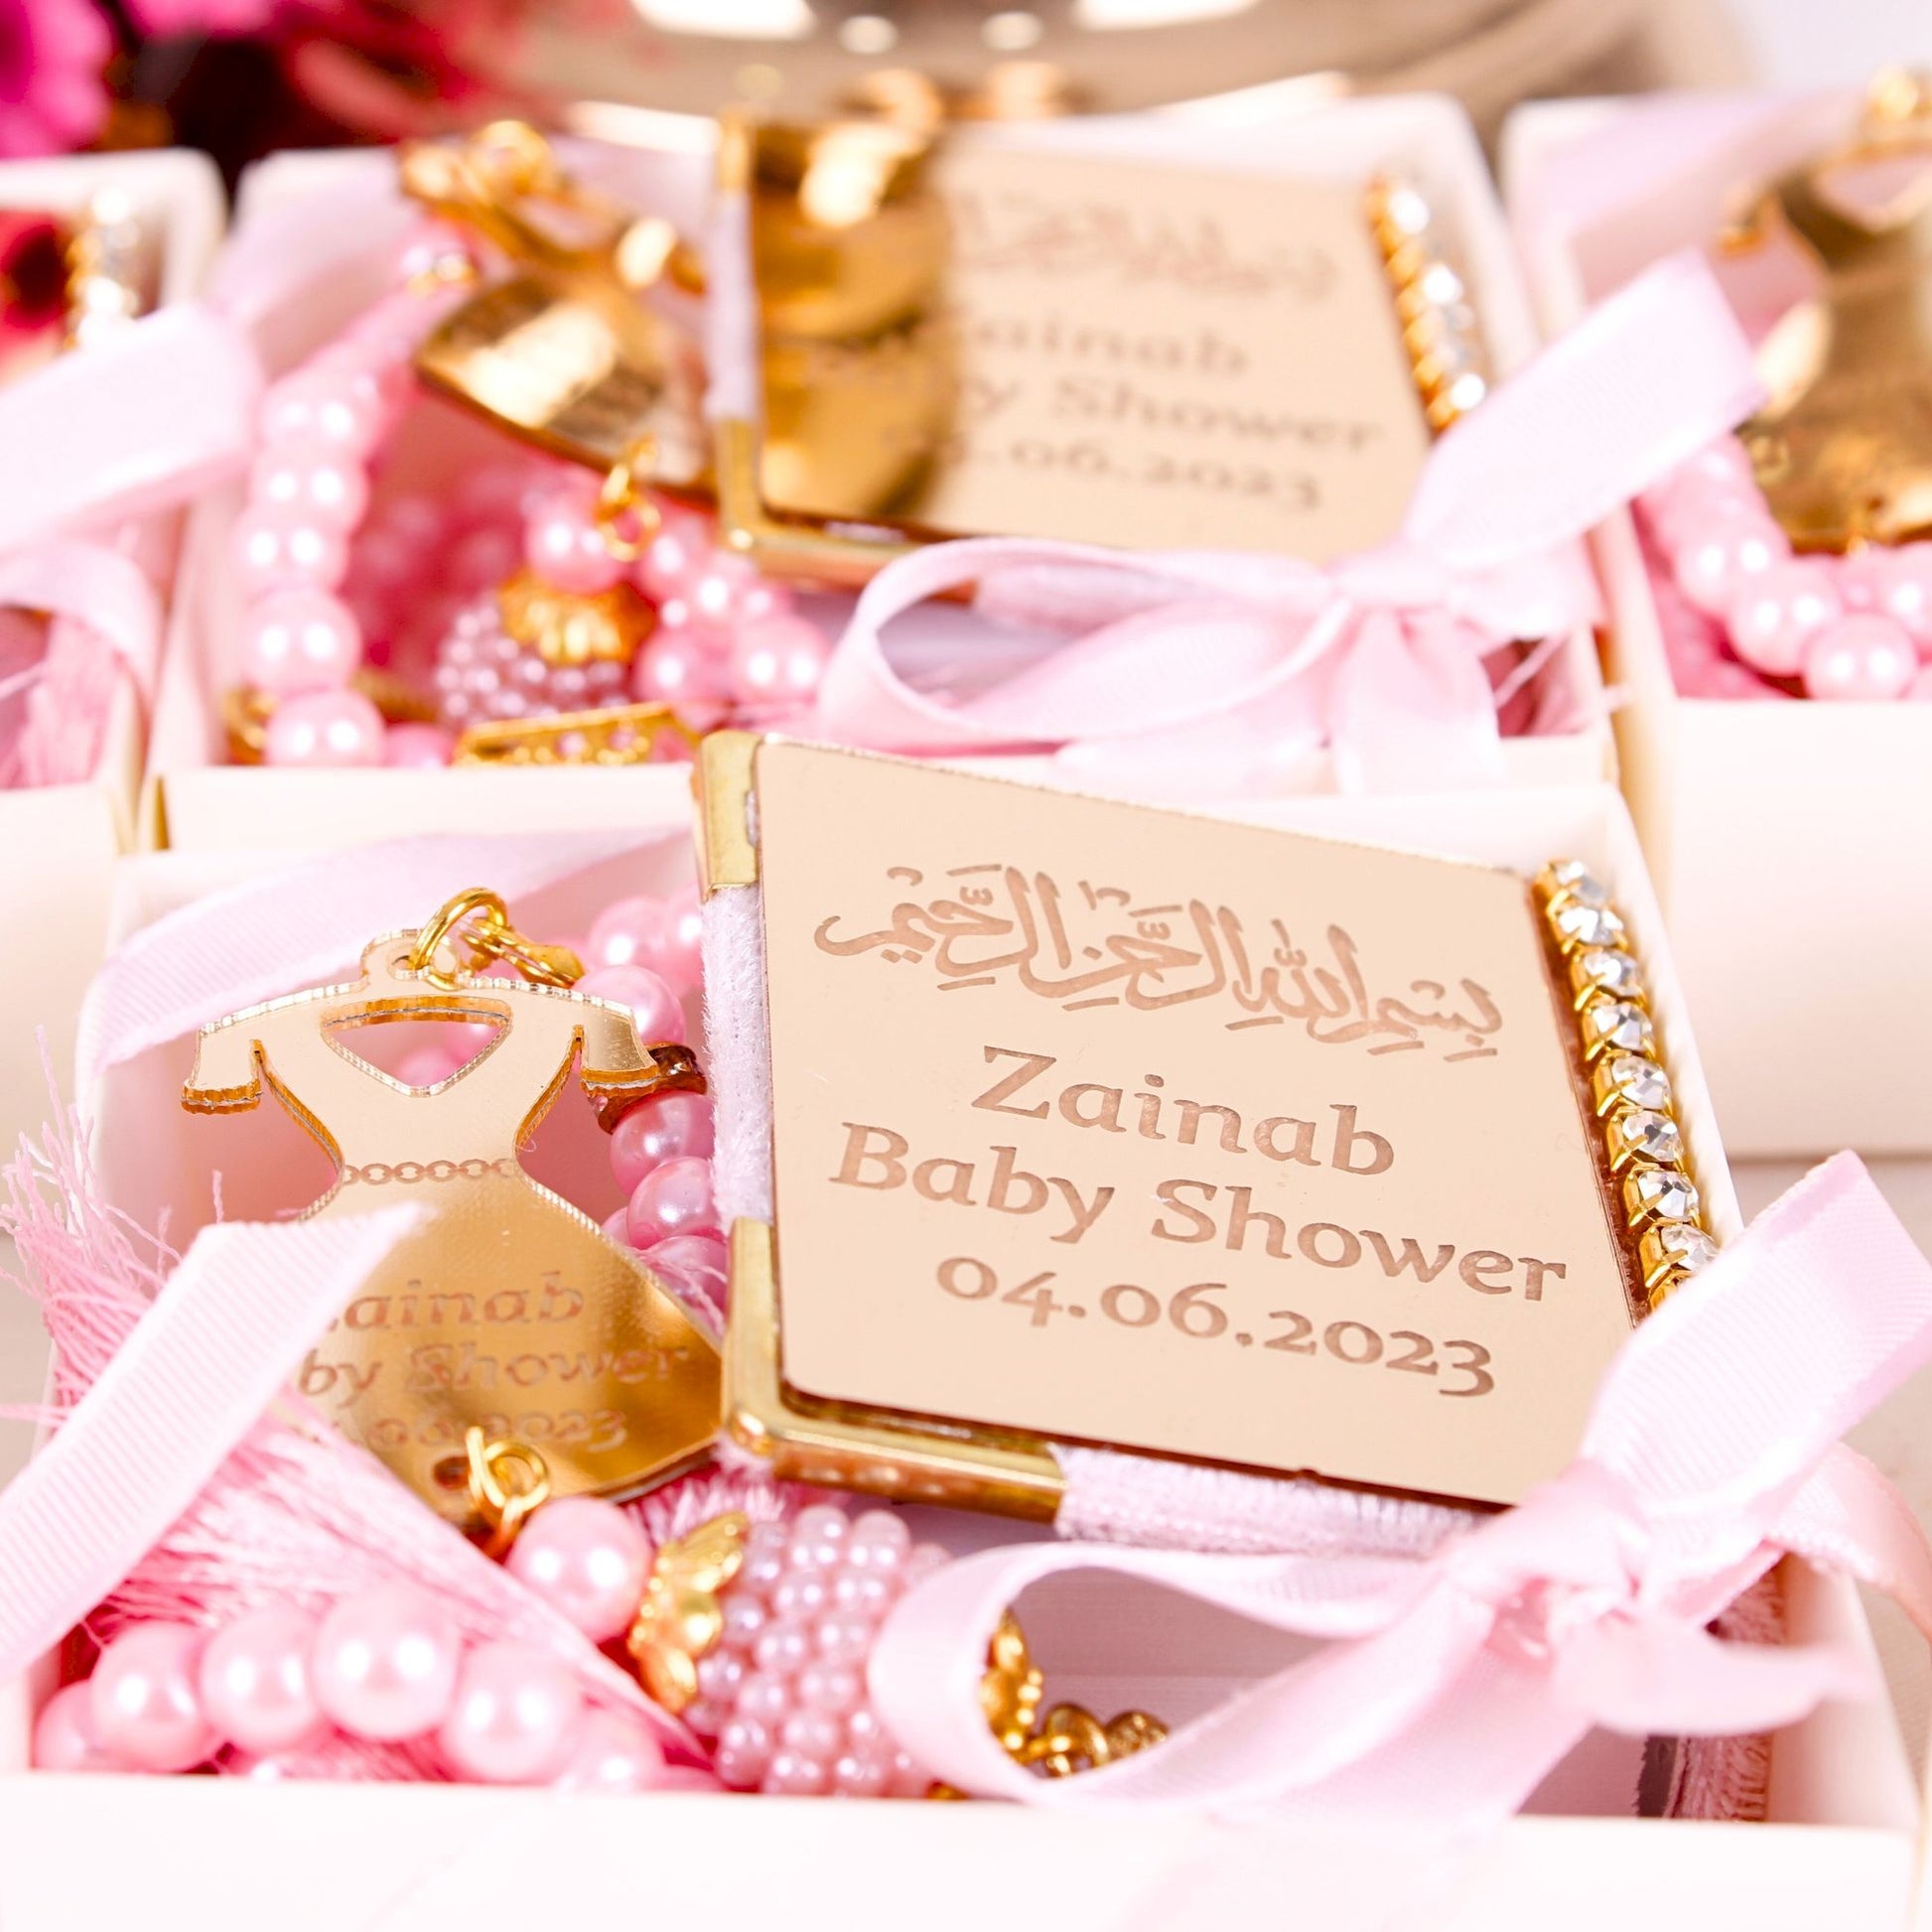 Personalized Mini Quran Pearl Prayer Beads Baby Shower Favor for Girls - Islamic Elite Favors is a handmade gift shop offering a wide variety of unique and personalized gifts for all occasions. Whether you're looking for the perfect Ramadan, Eid, Hajj, wedding gift or something special for a birthday, baby shower or anniversary, we have something for everyone. High quality, made with love.